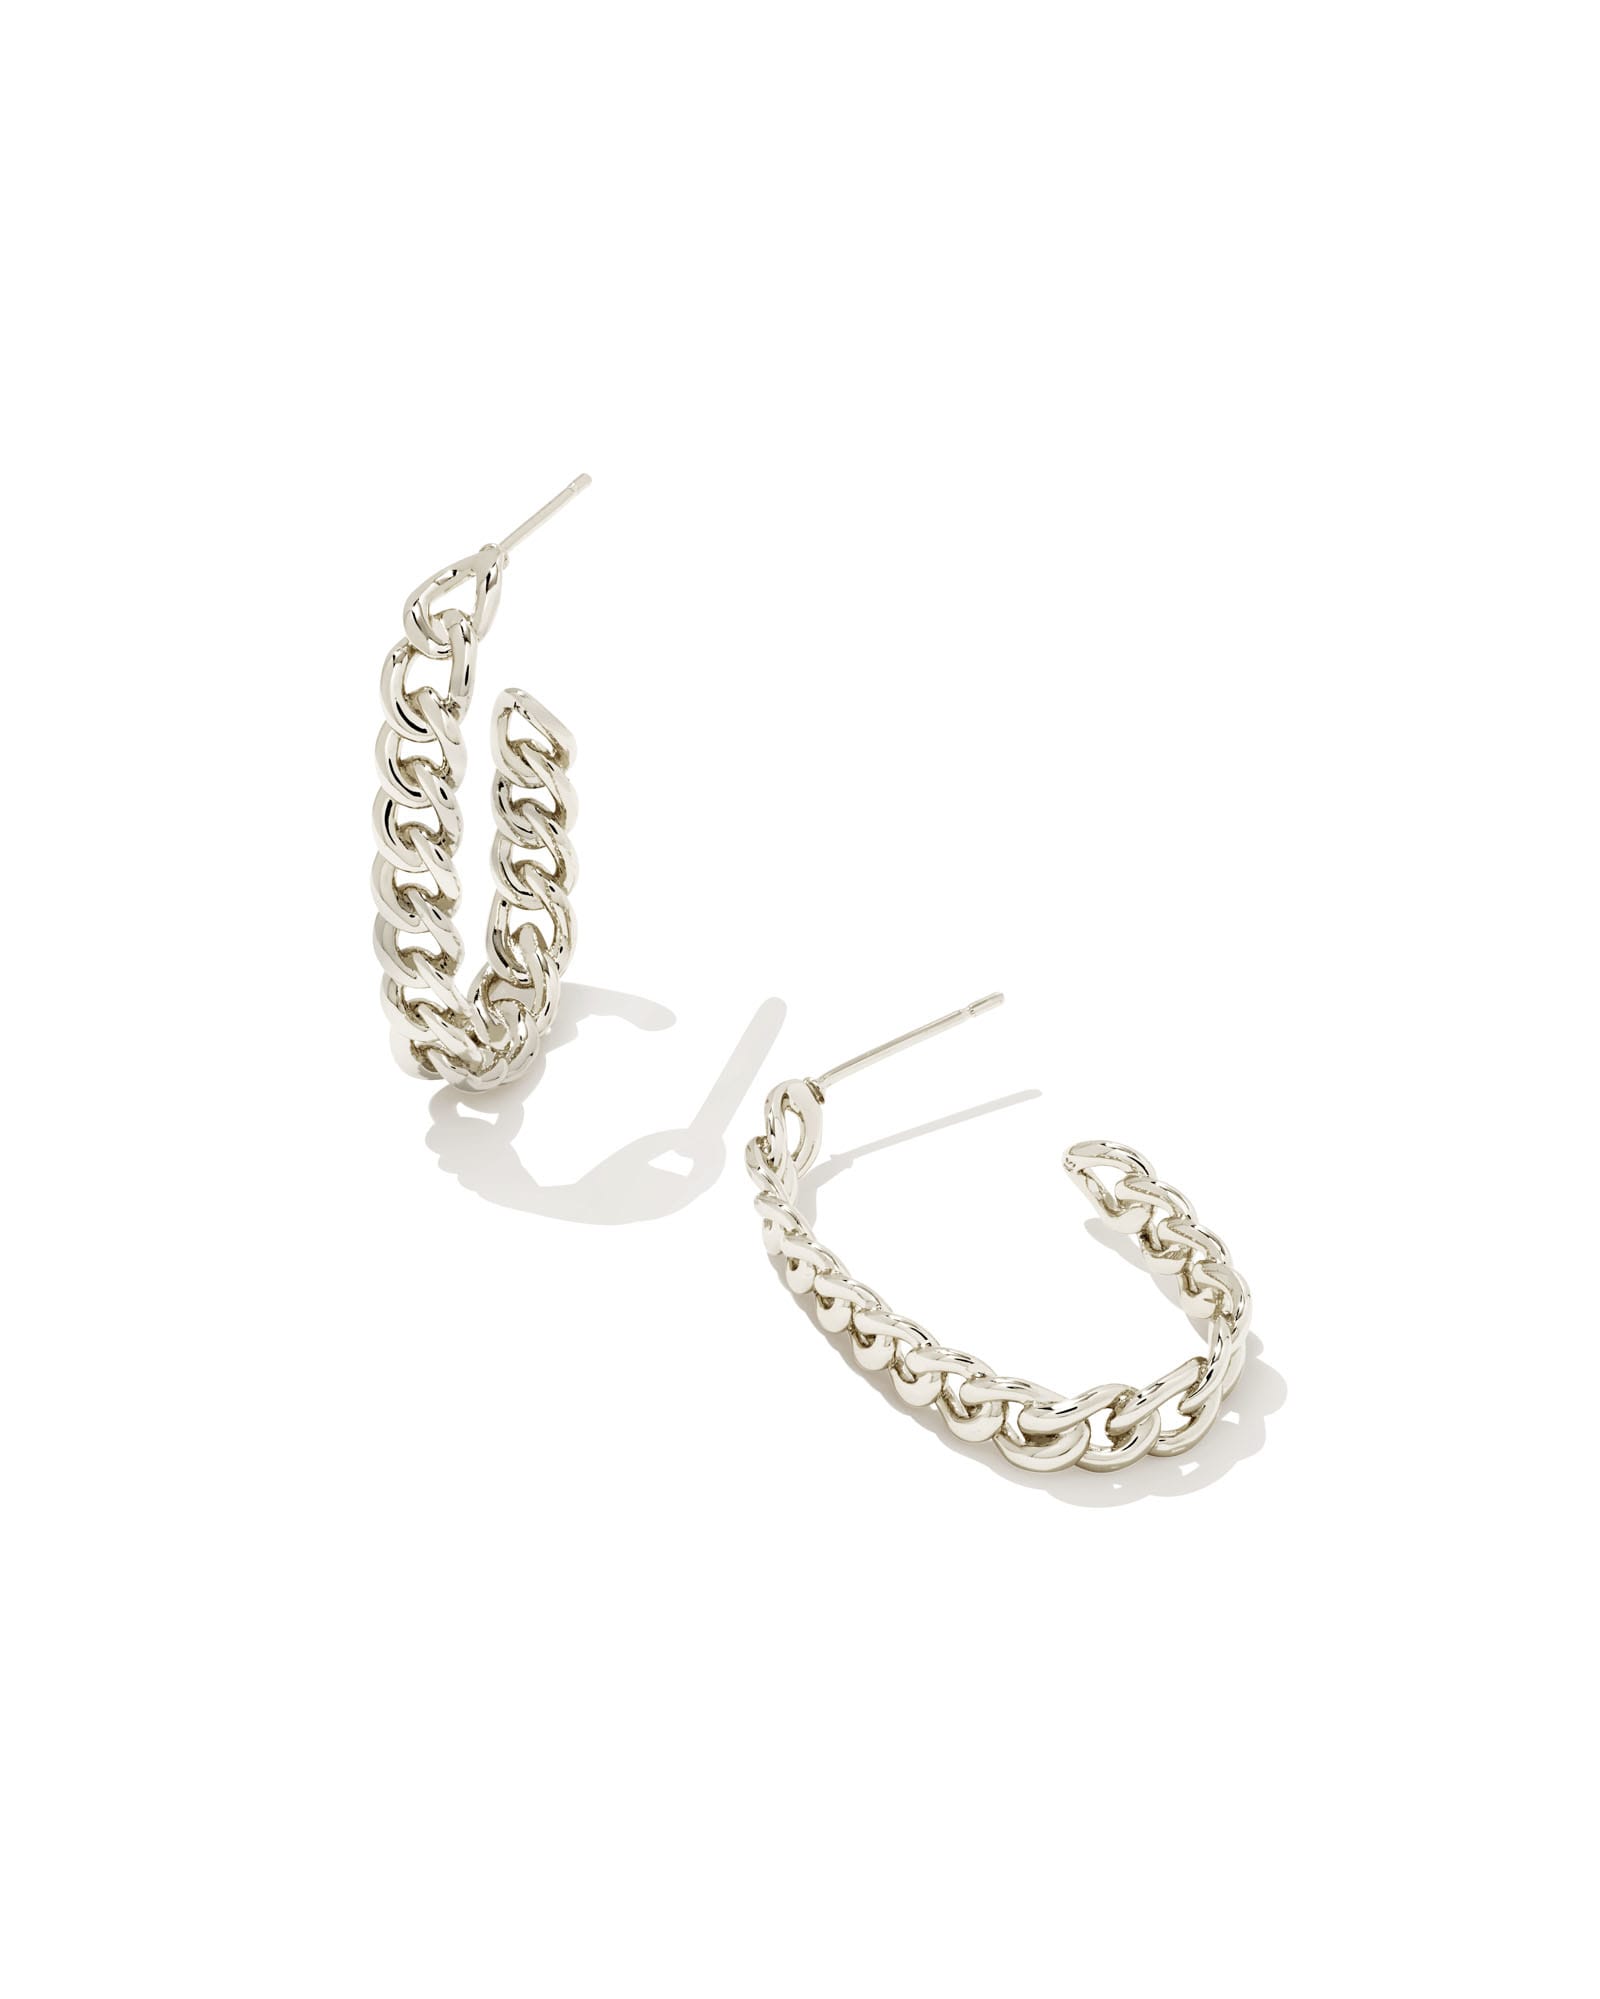 Cailin Gold Crystal Stud Earrings in White Crystal | Kendra Scott